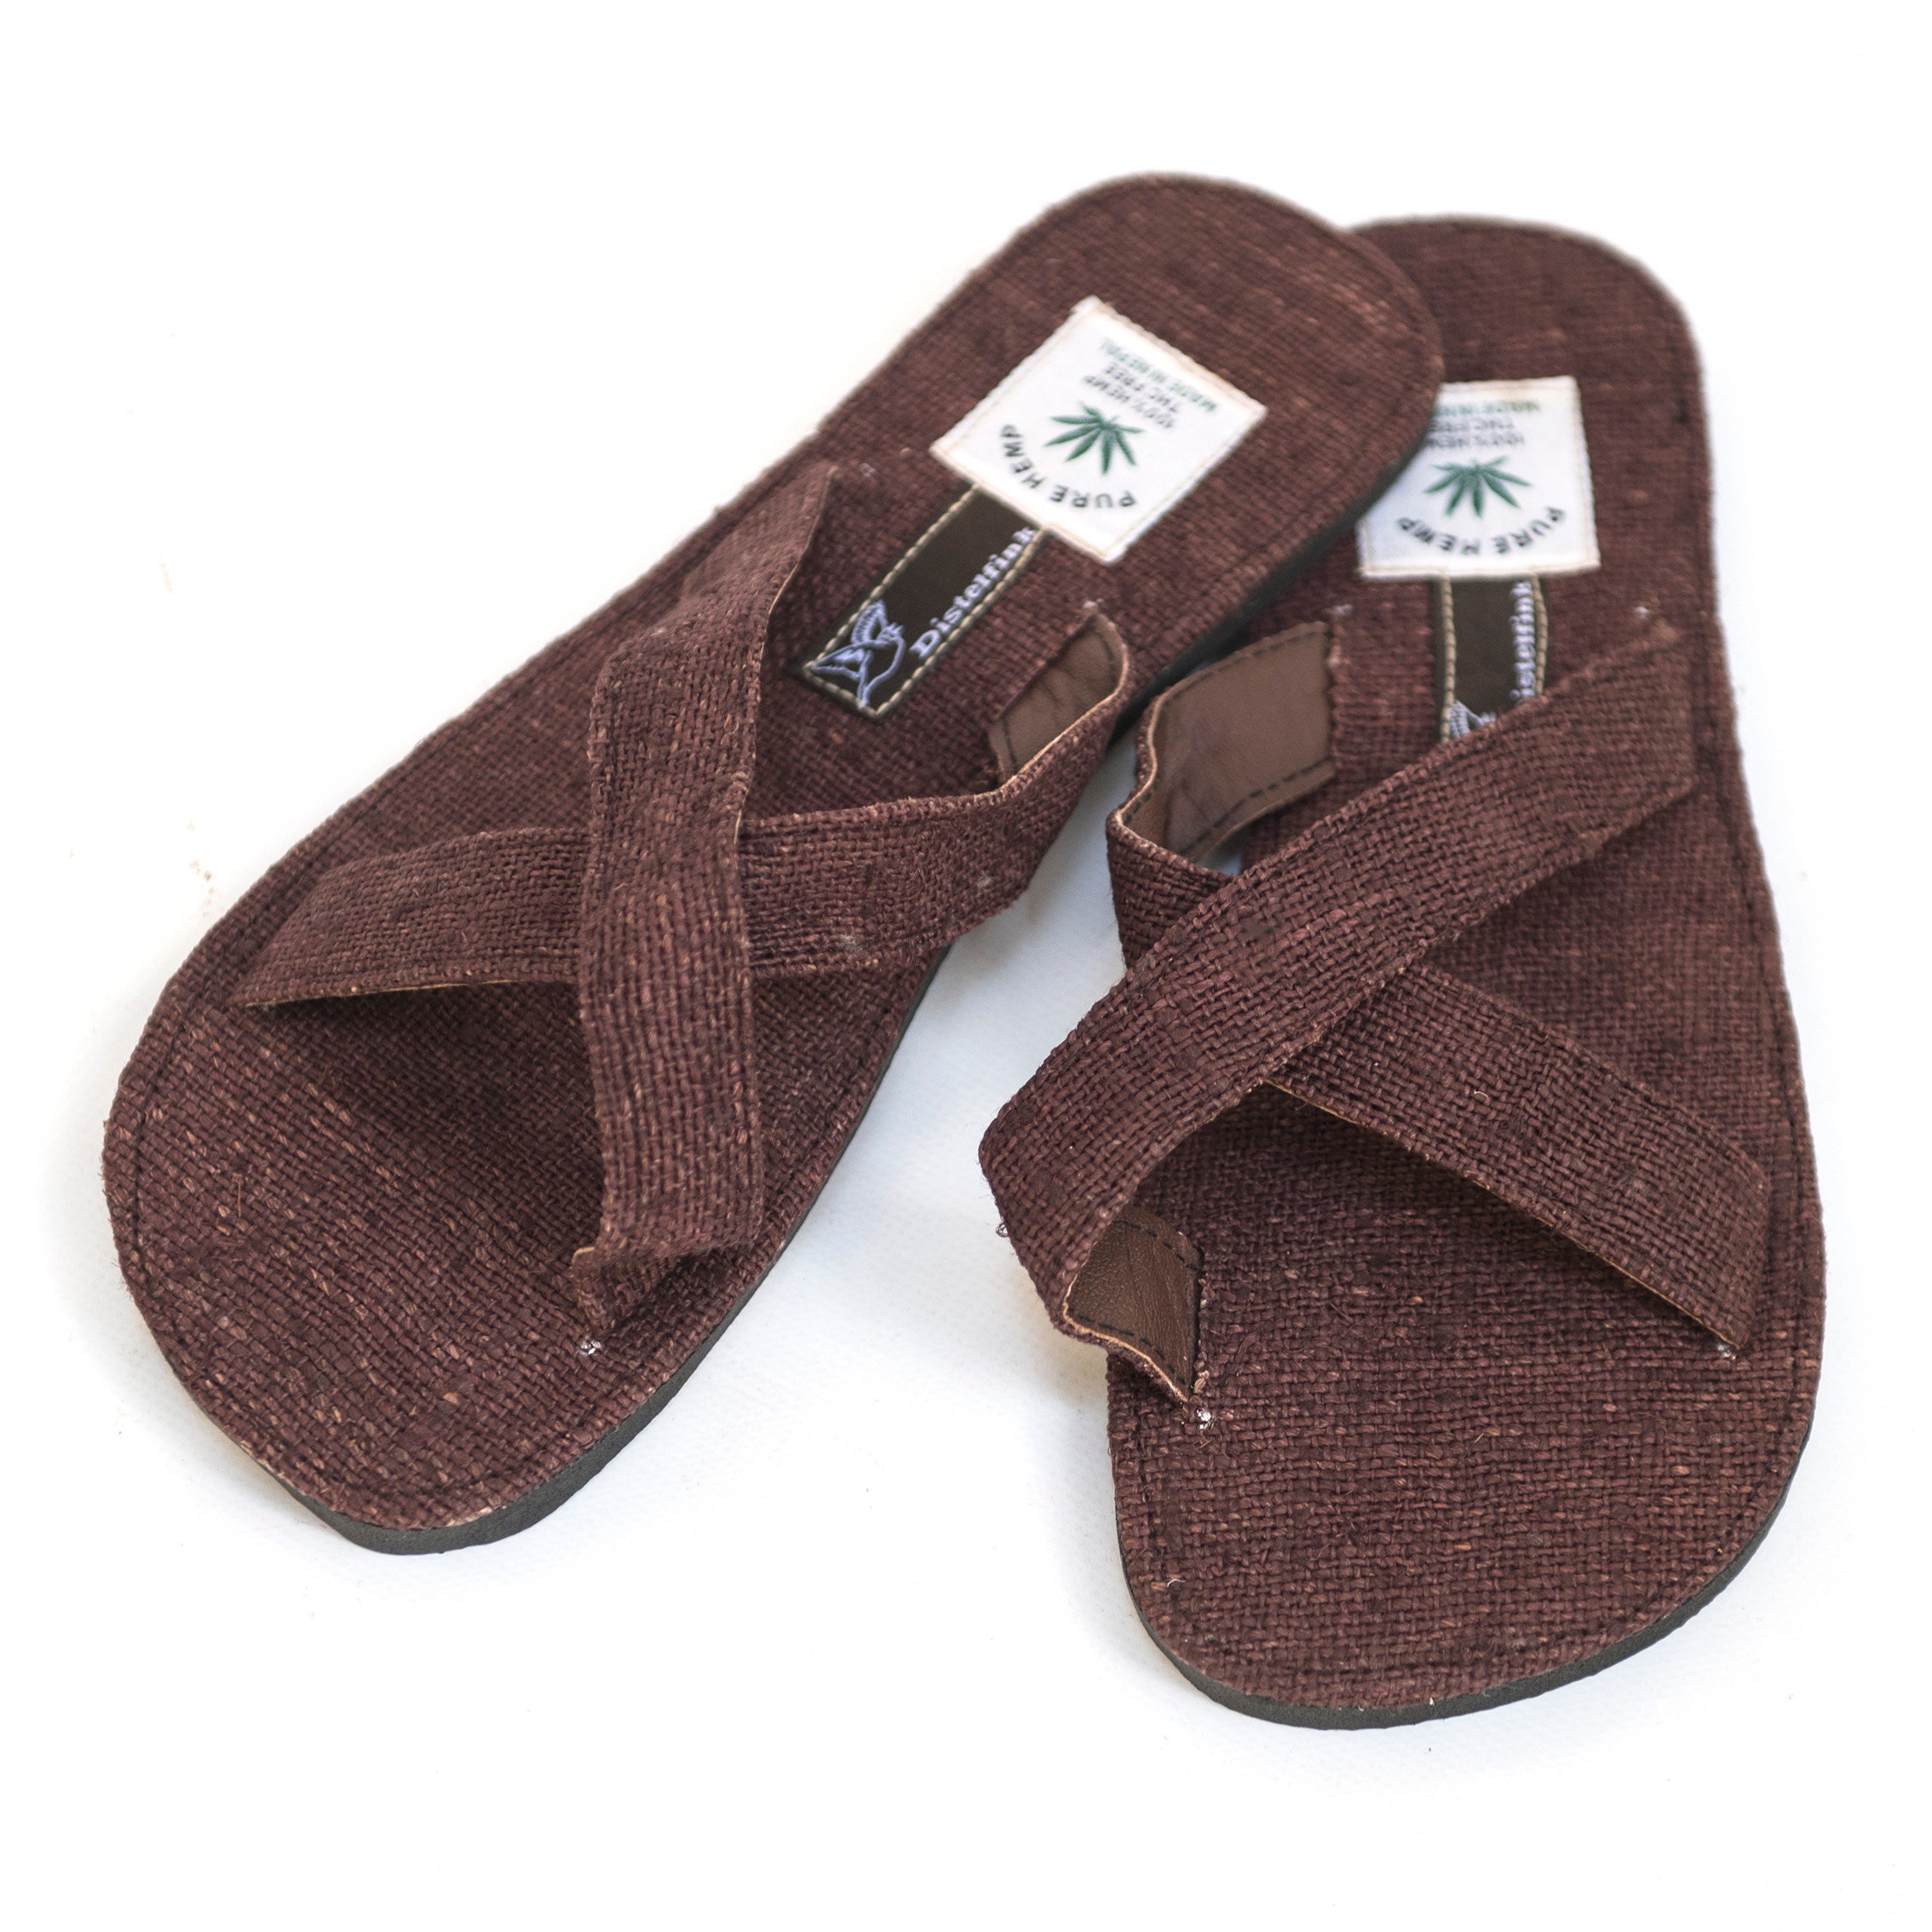 X-slippers Made of Hemp With Rubber Sole, Slippers, Slippers